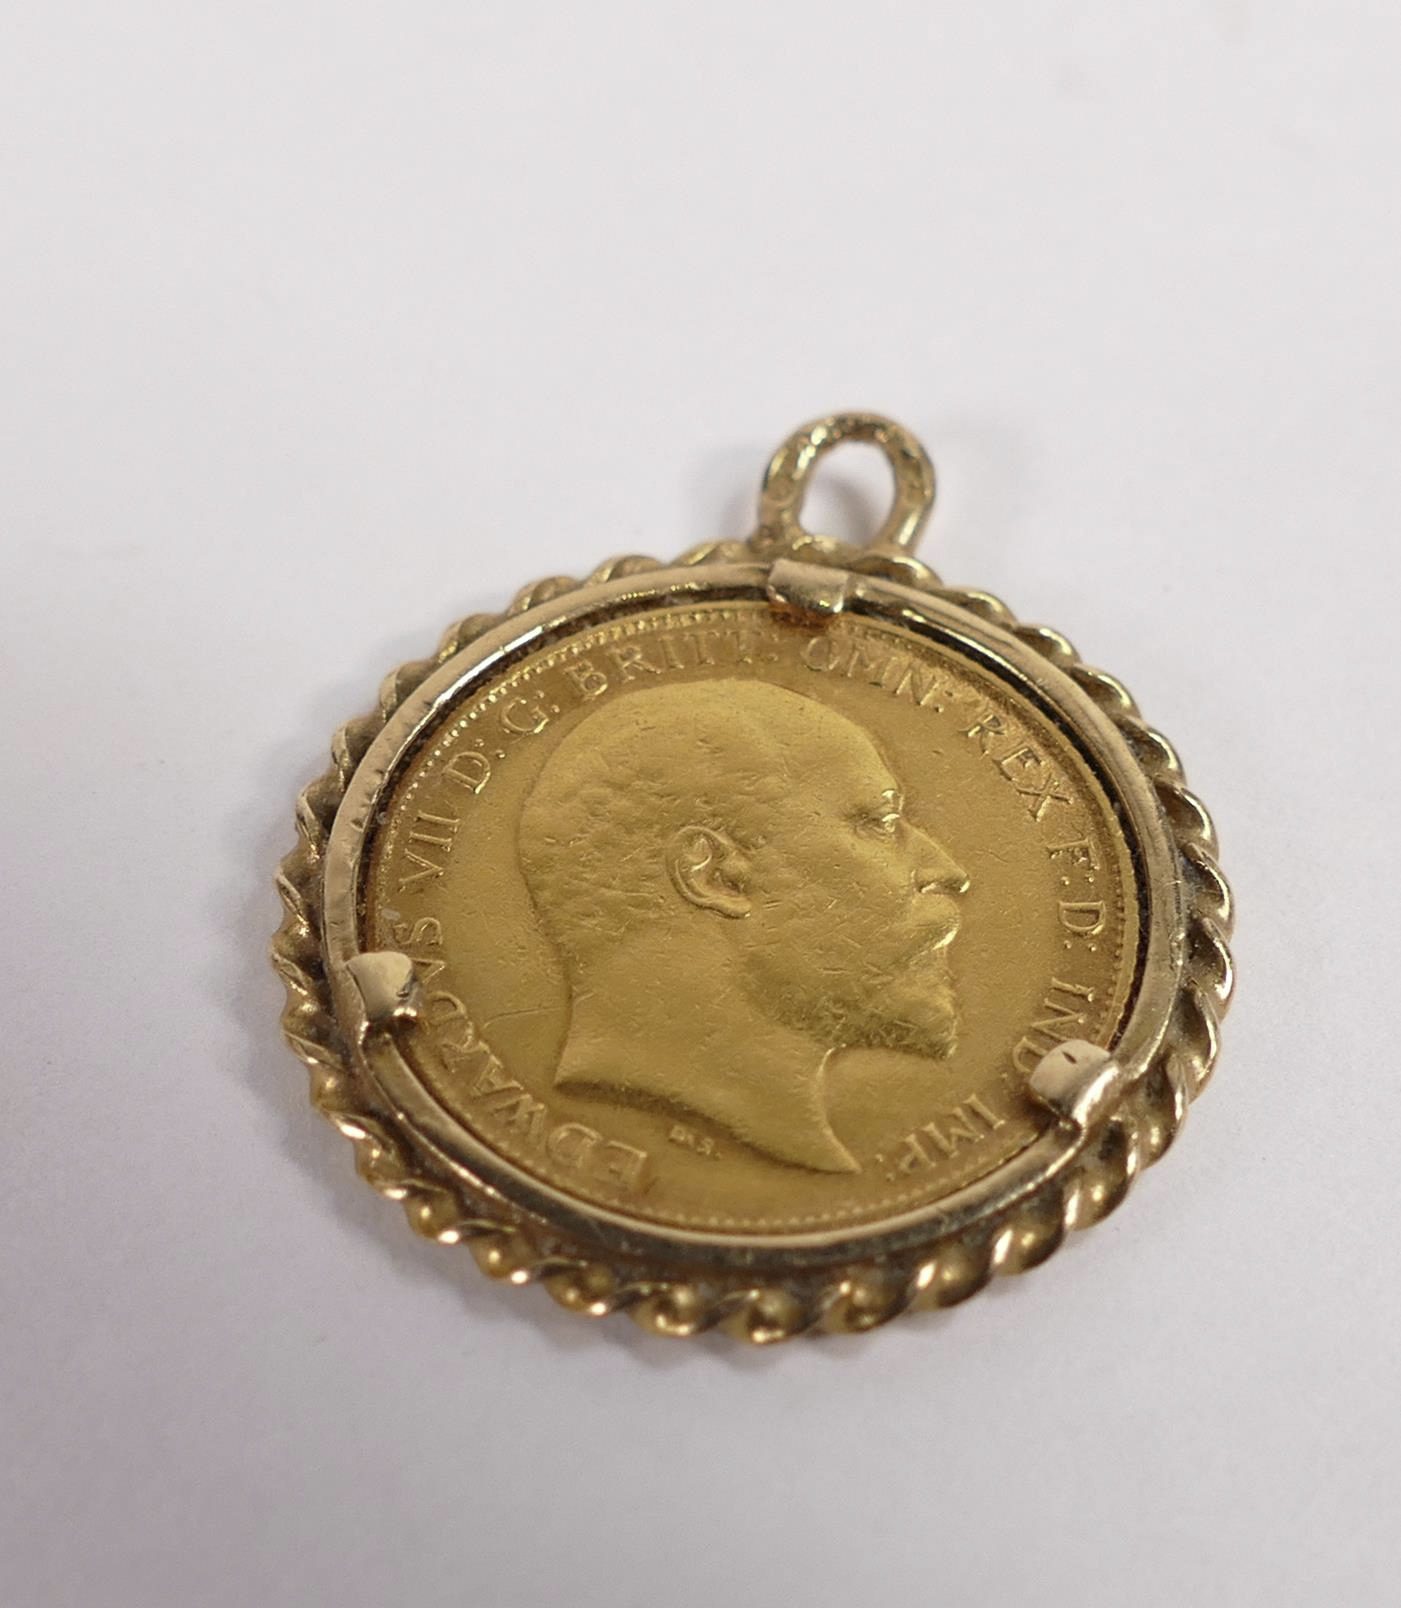 This gold half sovereign dated 1903 and mounted in 9ct gold mount sold for £220.